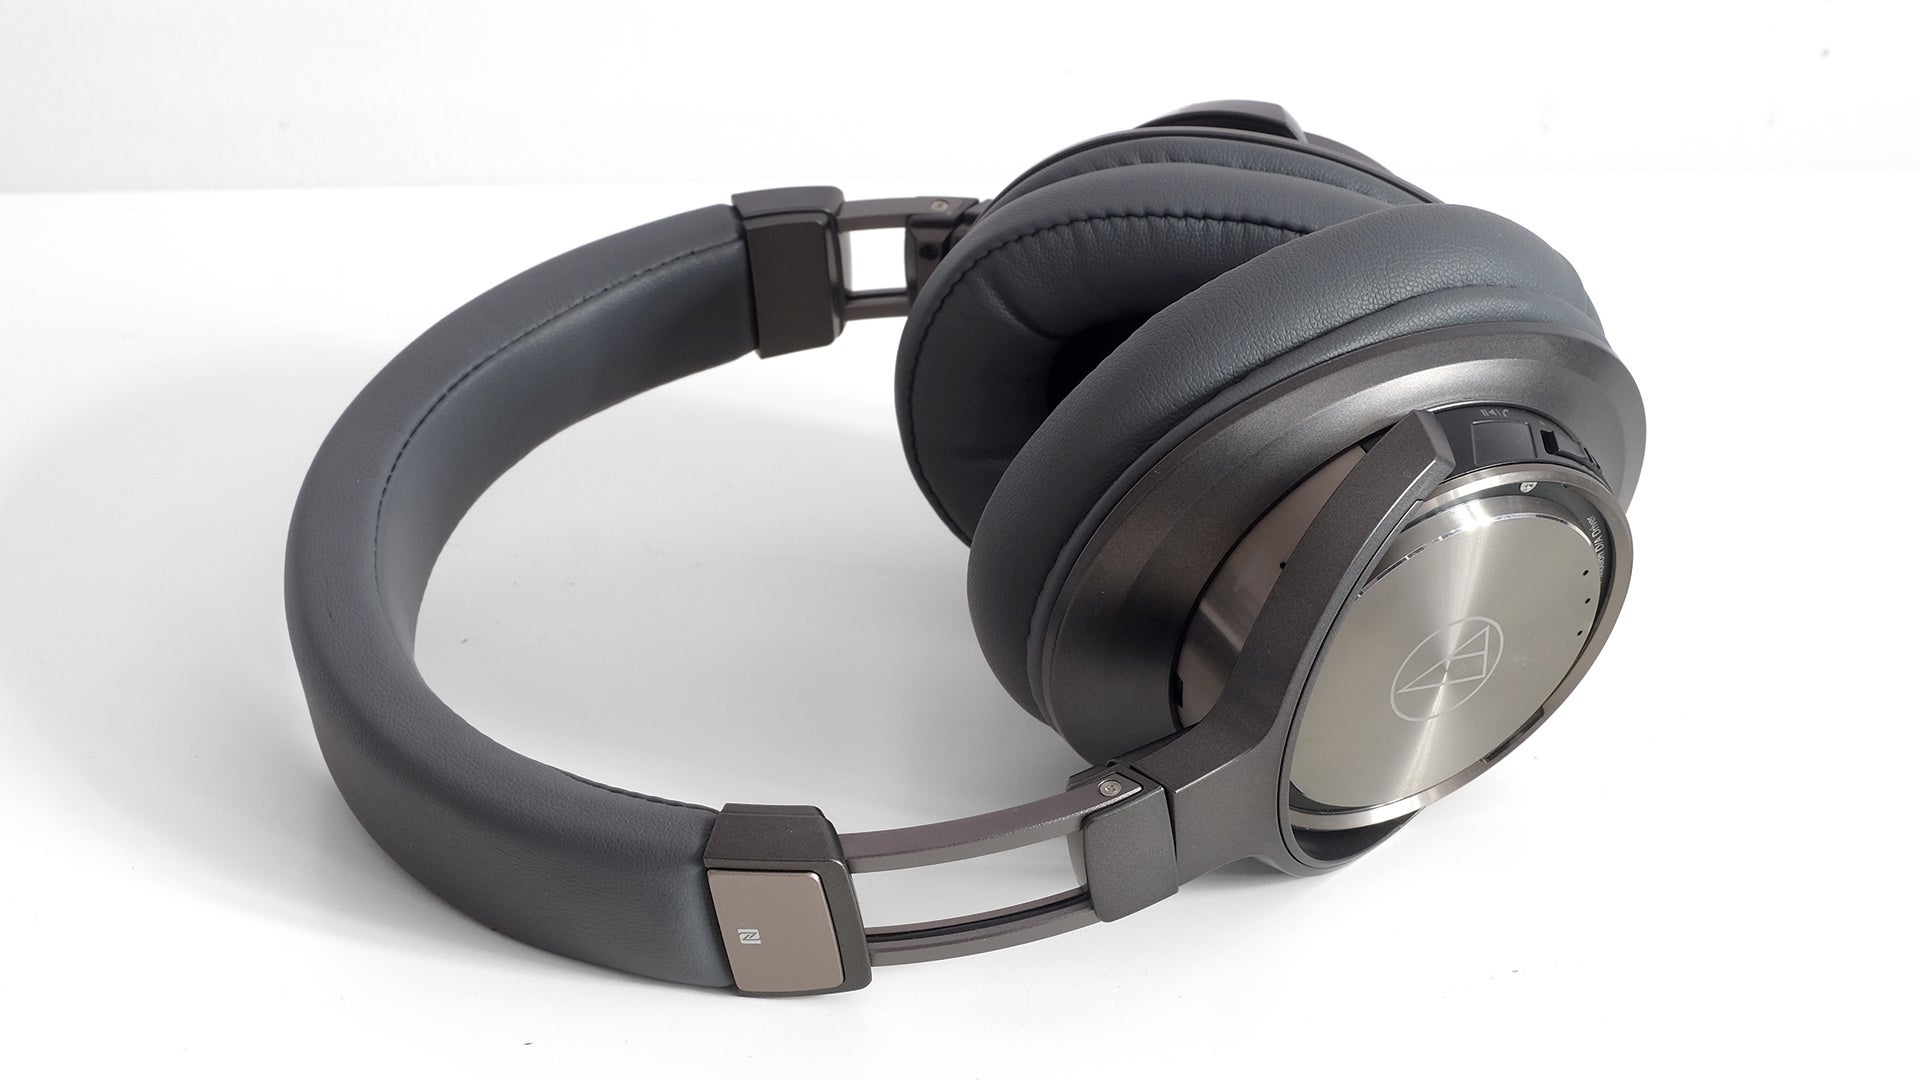 Audio-Technica ATH-DSR9BT Review | Trusted Reviews